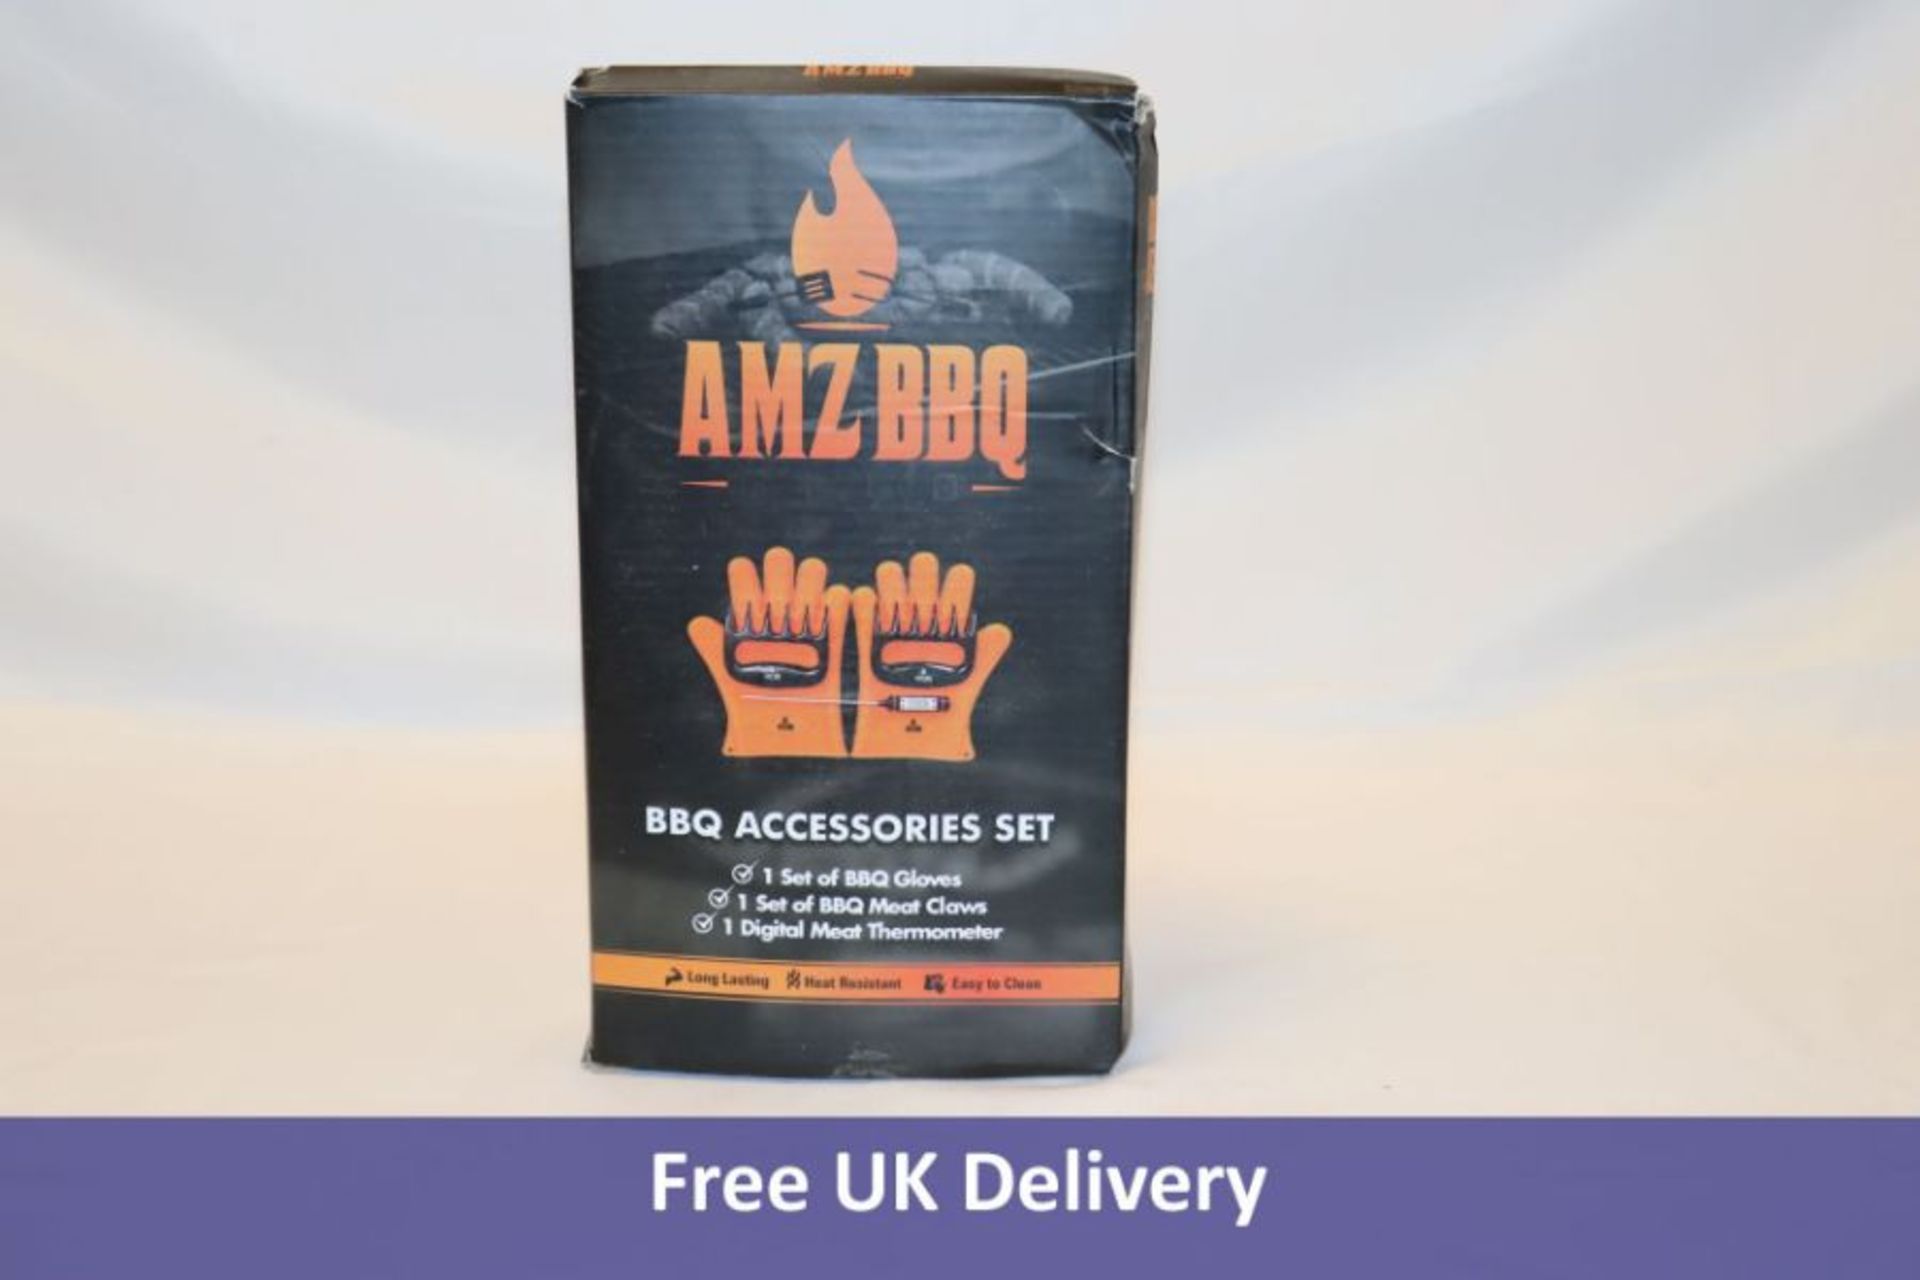 Four AMZBBQ Accessories Set Includes 1x Set Of Gloves, 1x BBQ Meat Claws, 1x Digital Meat Thermomete